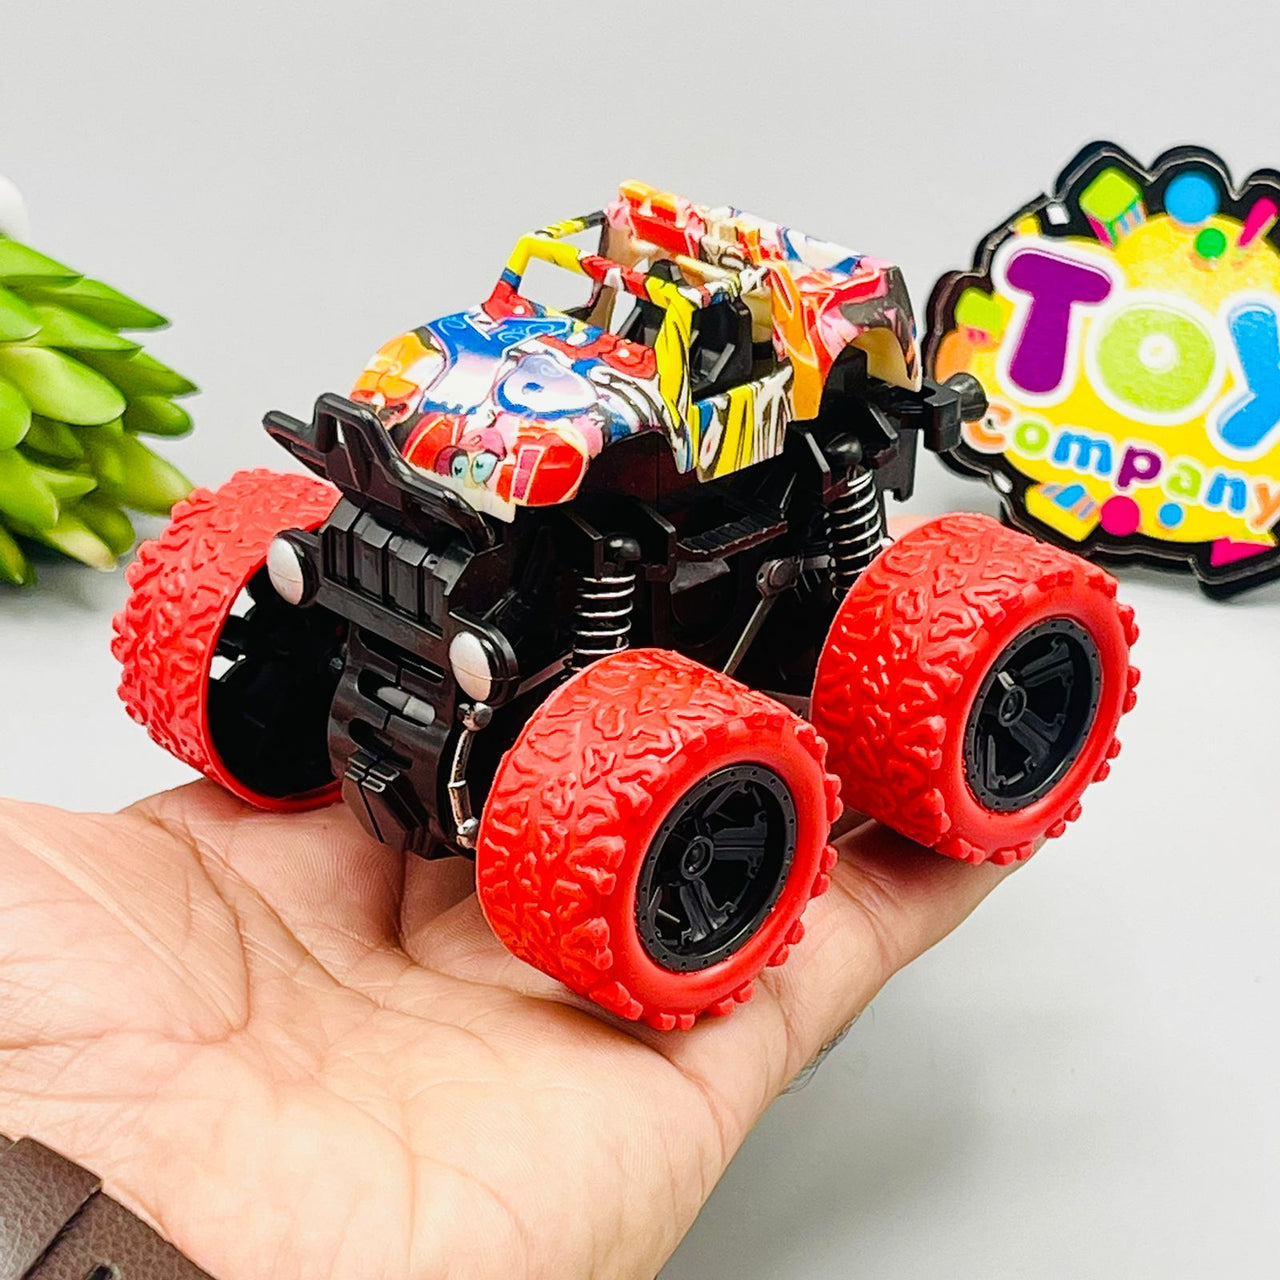 1:36 Friction Powered Monster Zap Car